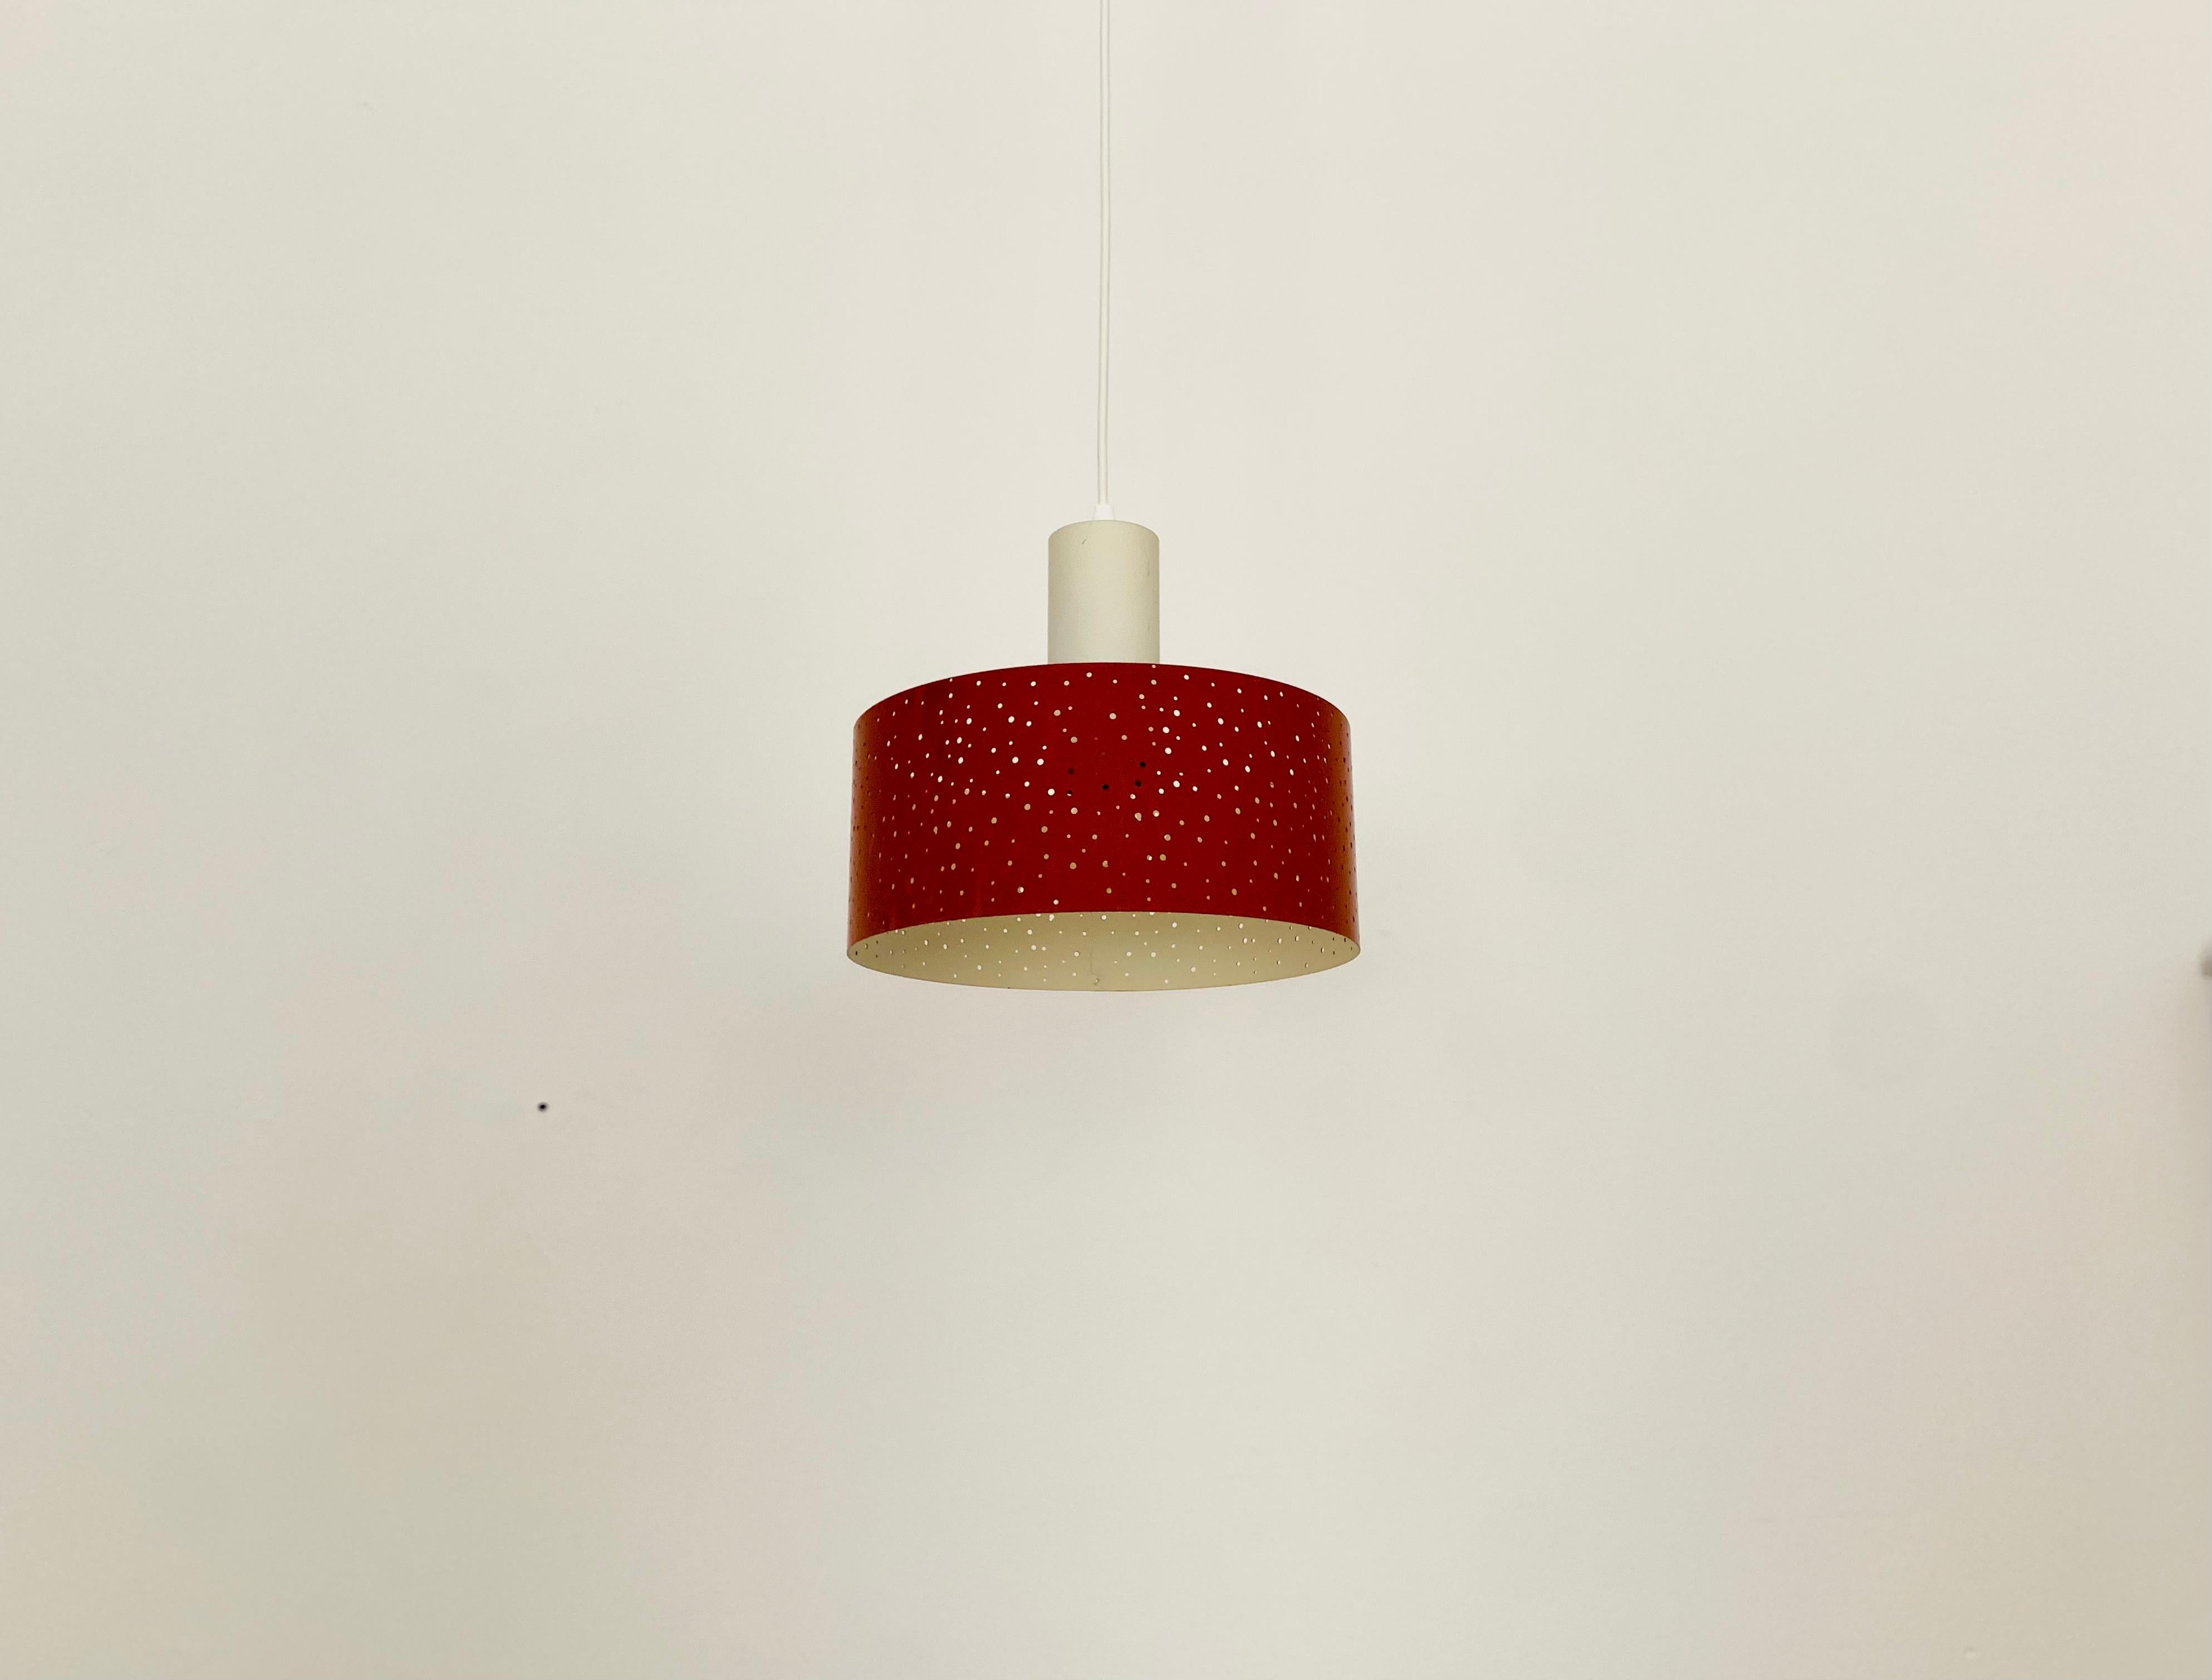 Italian Perforated Metal Pendant Lamp by Ernst Igl for Hillebrand  For Sale